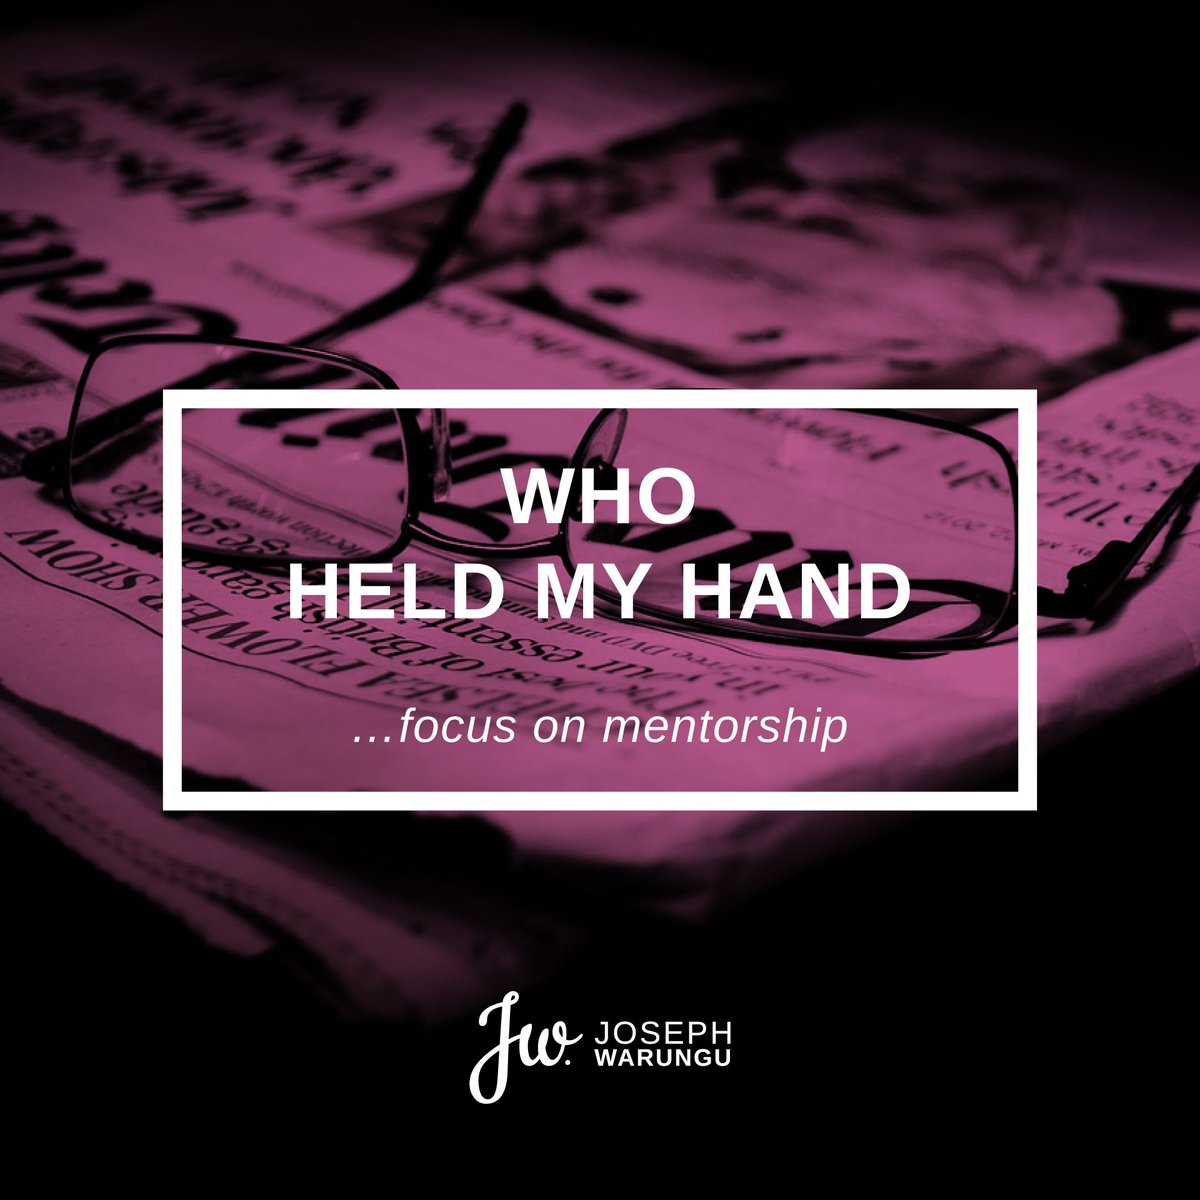 That one single door opened huge gates for me to eventually end up at the BBC in London almost ten years later. He was the first influential person to hold my hand professionally. #WhoHeldMyHand